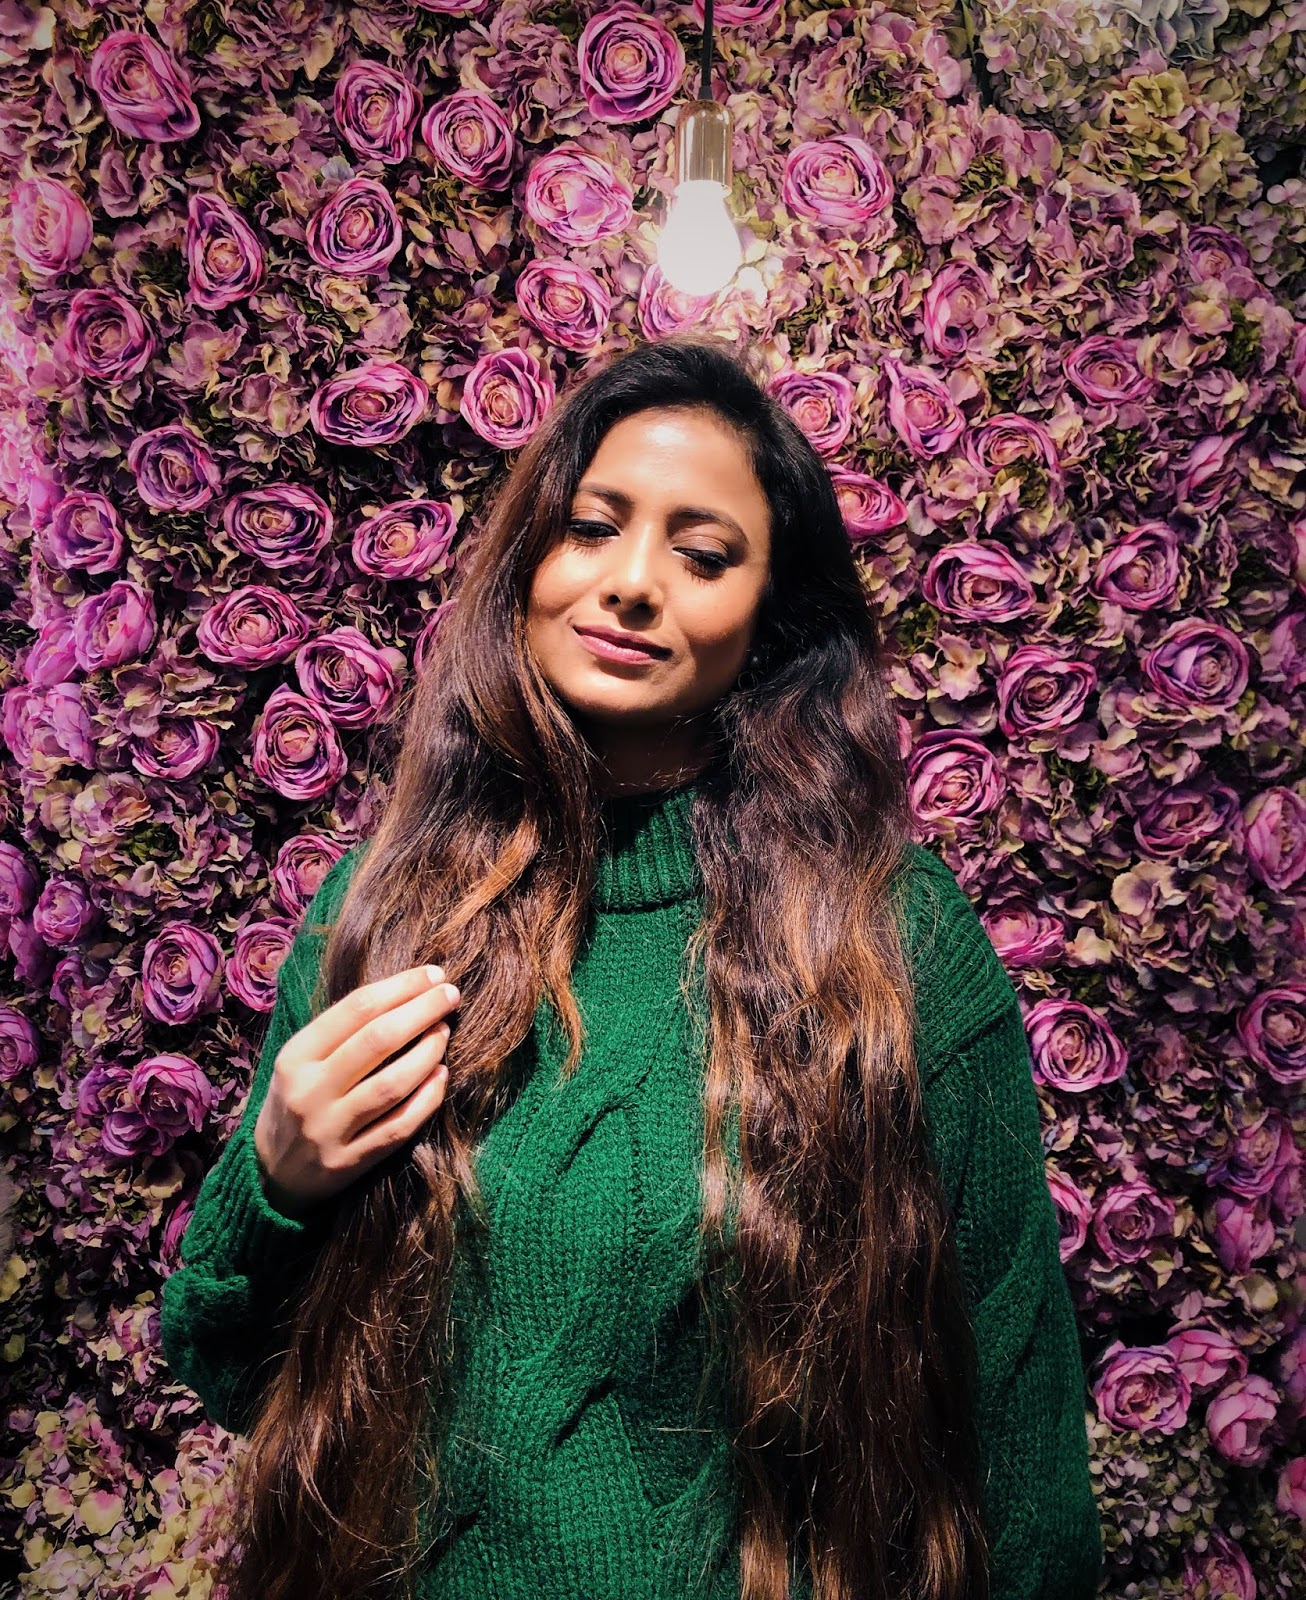 flower wall london, green jumper, élan cafe london, élan cafe market place, striped trousers, mountain boots, h&m trousers, effortless chic, london style, how to brighten winter, london blogger, indian blogger, what to wear in london, london cafe, london insta spot, 